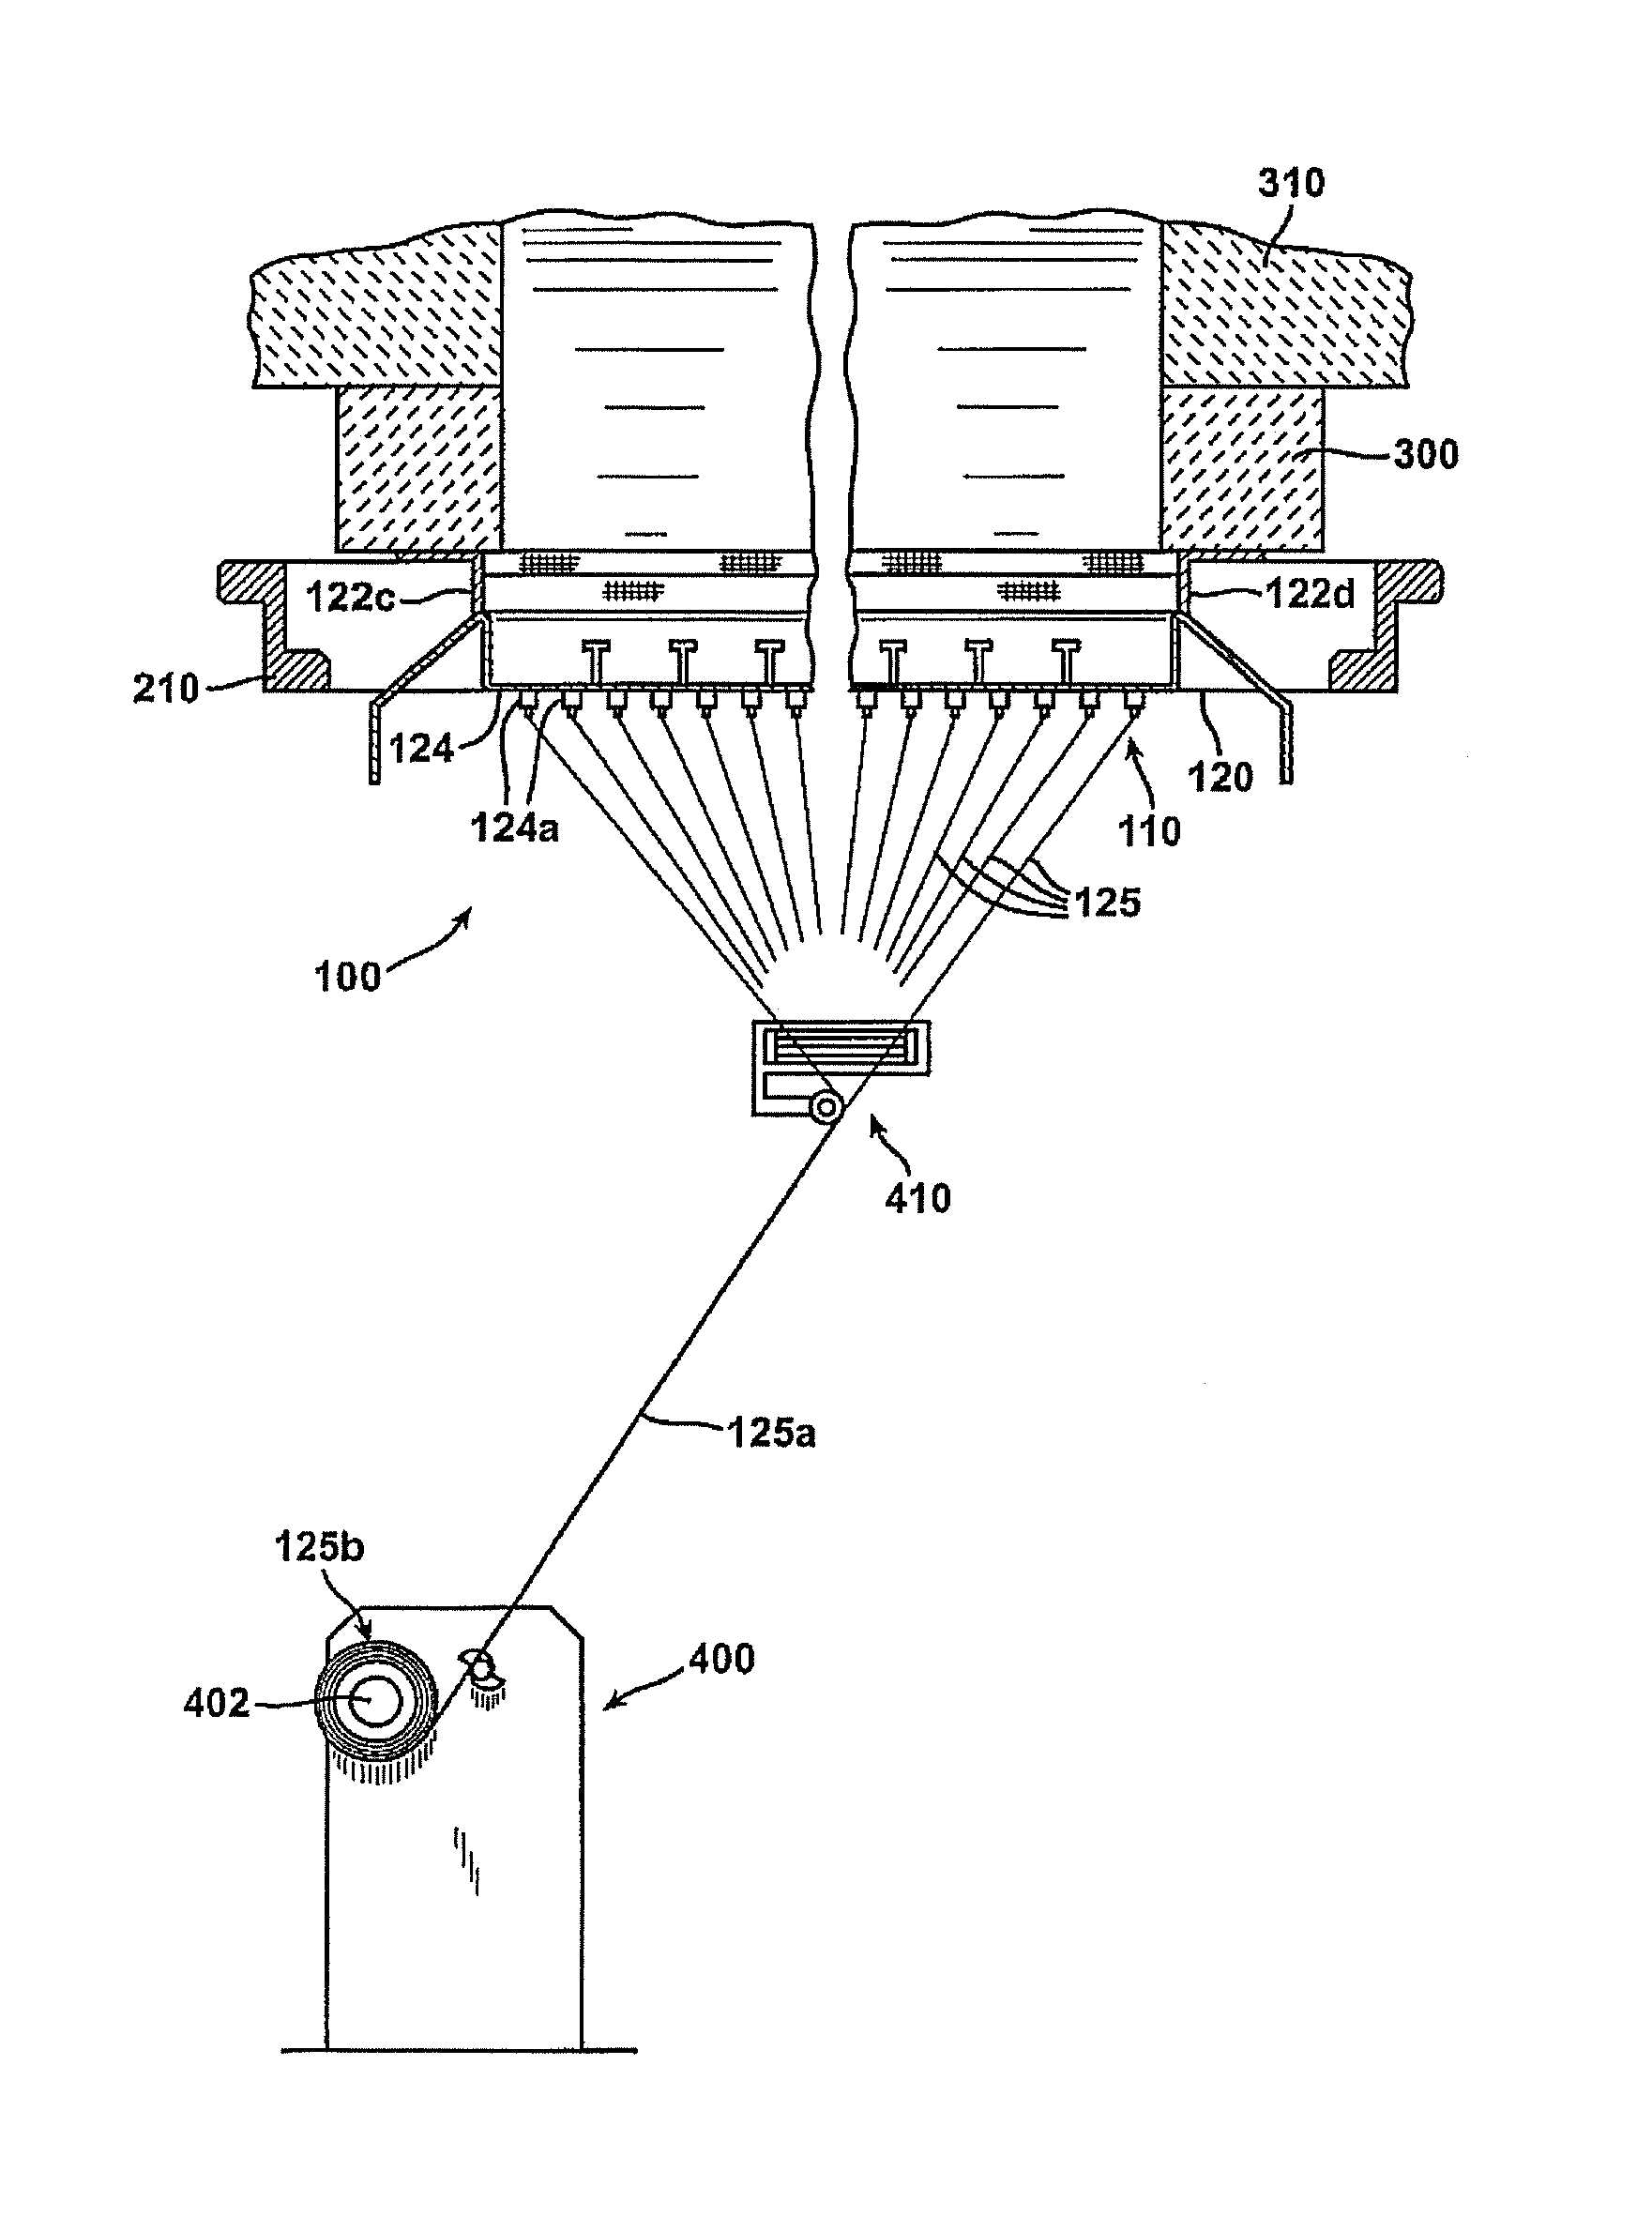 Method of manufacturing s-glass fibers in a direct melt operation and products formed therefrom